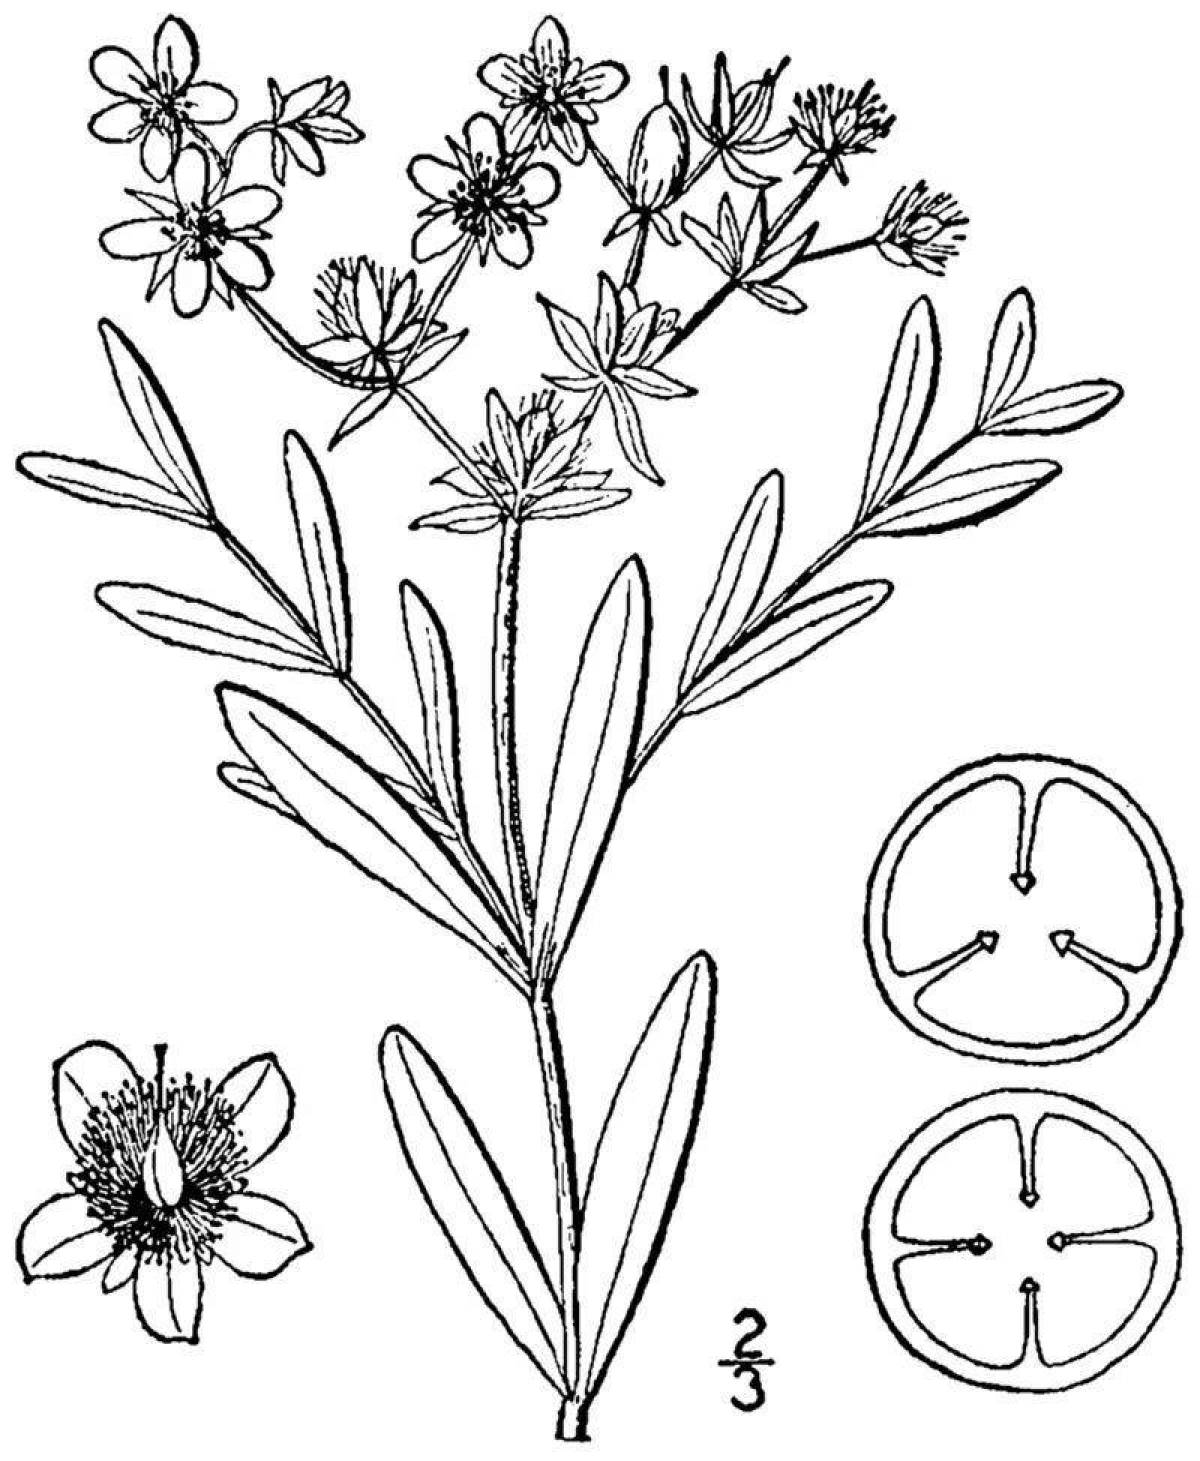 St. John's wort coloring page